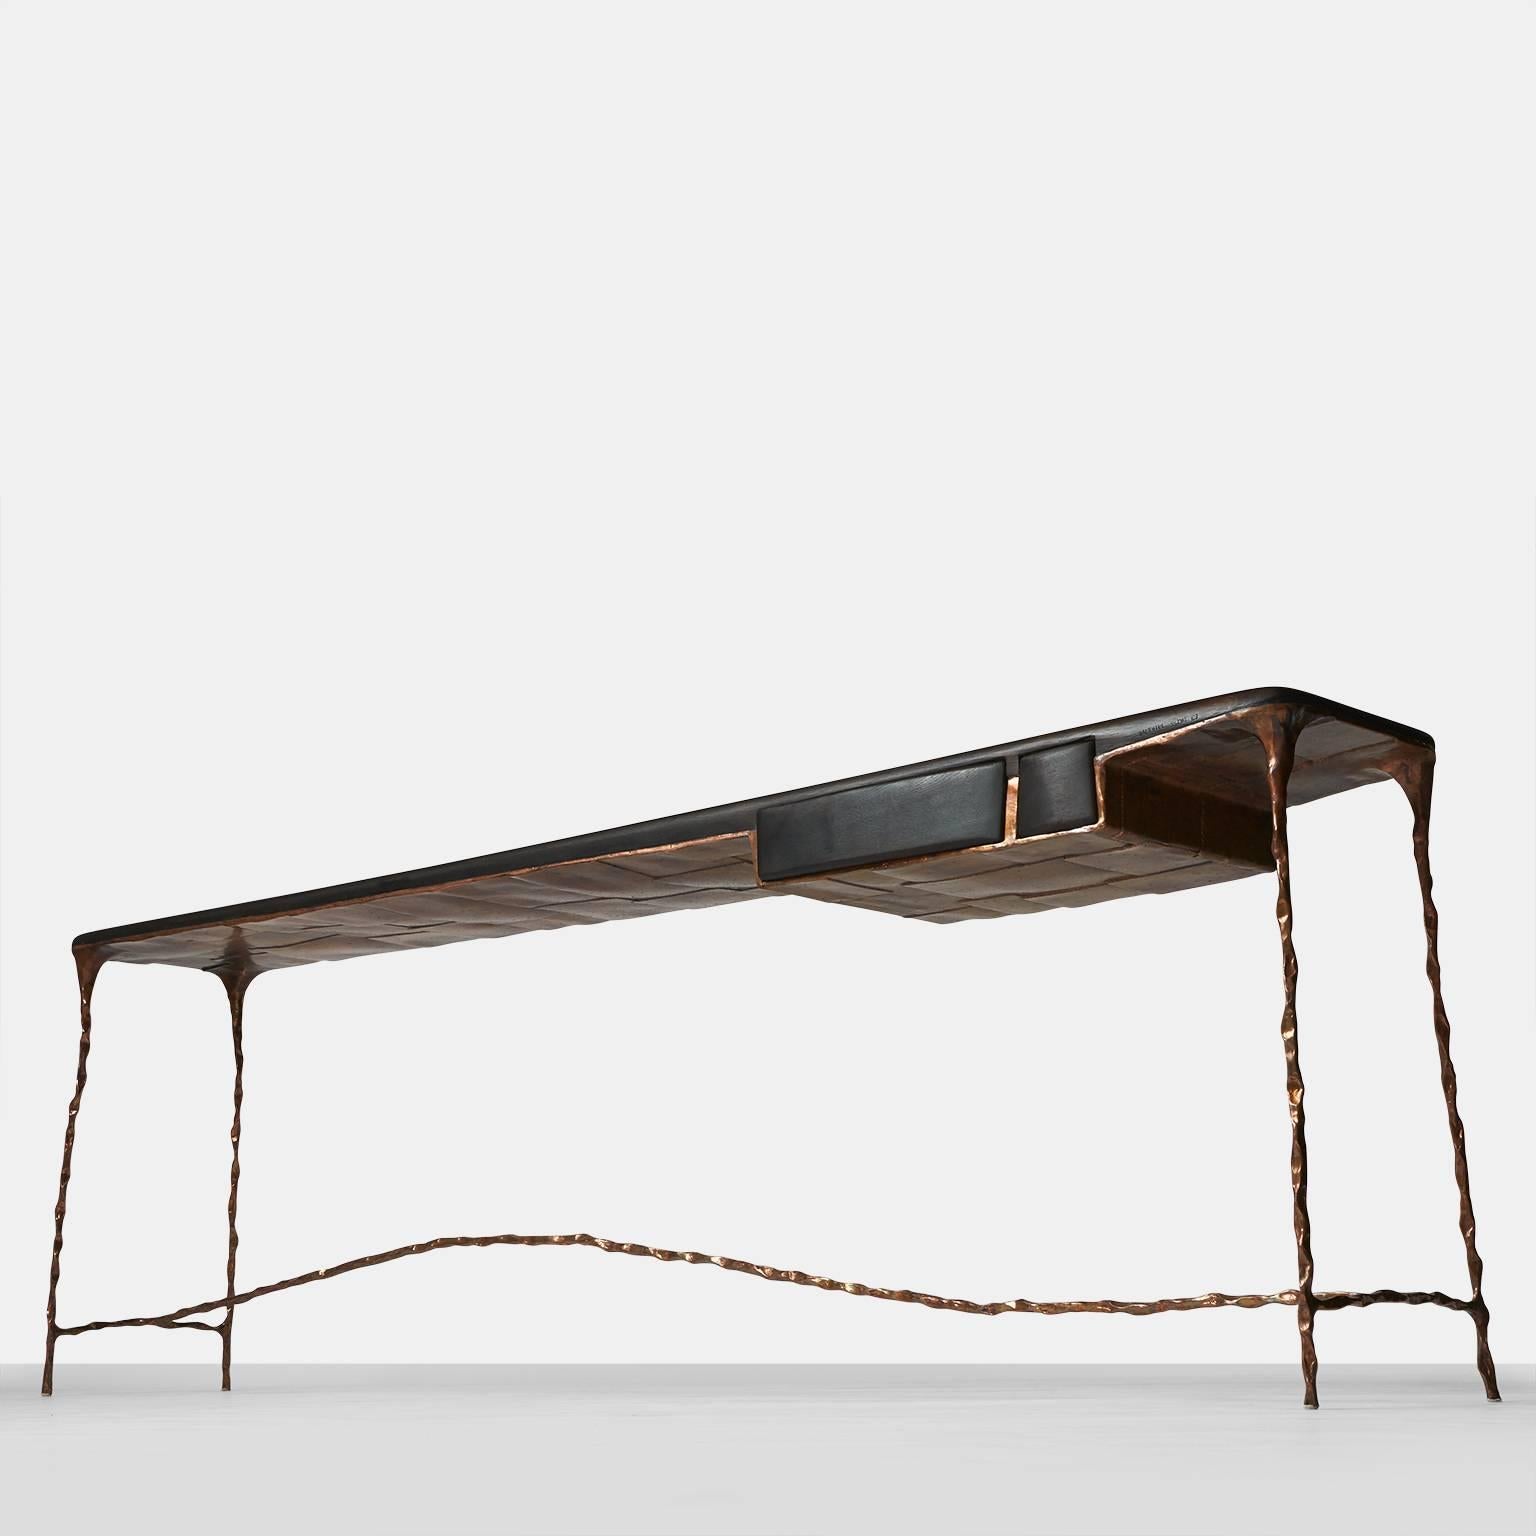 An elongated console table or desk made with a solid hand-forged copper base and a charred oak top. The desk features two drawers each in different dimensions and the back side has matching false drawers.   With all custom produced items, each will